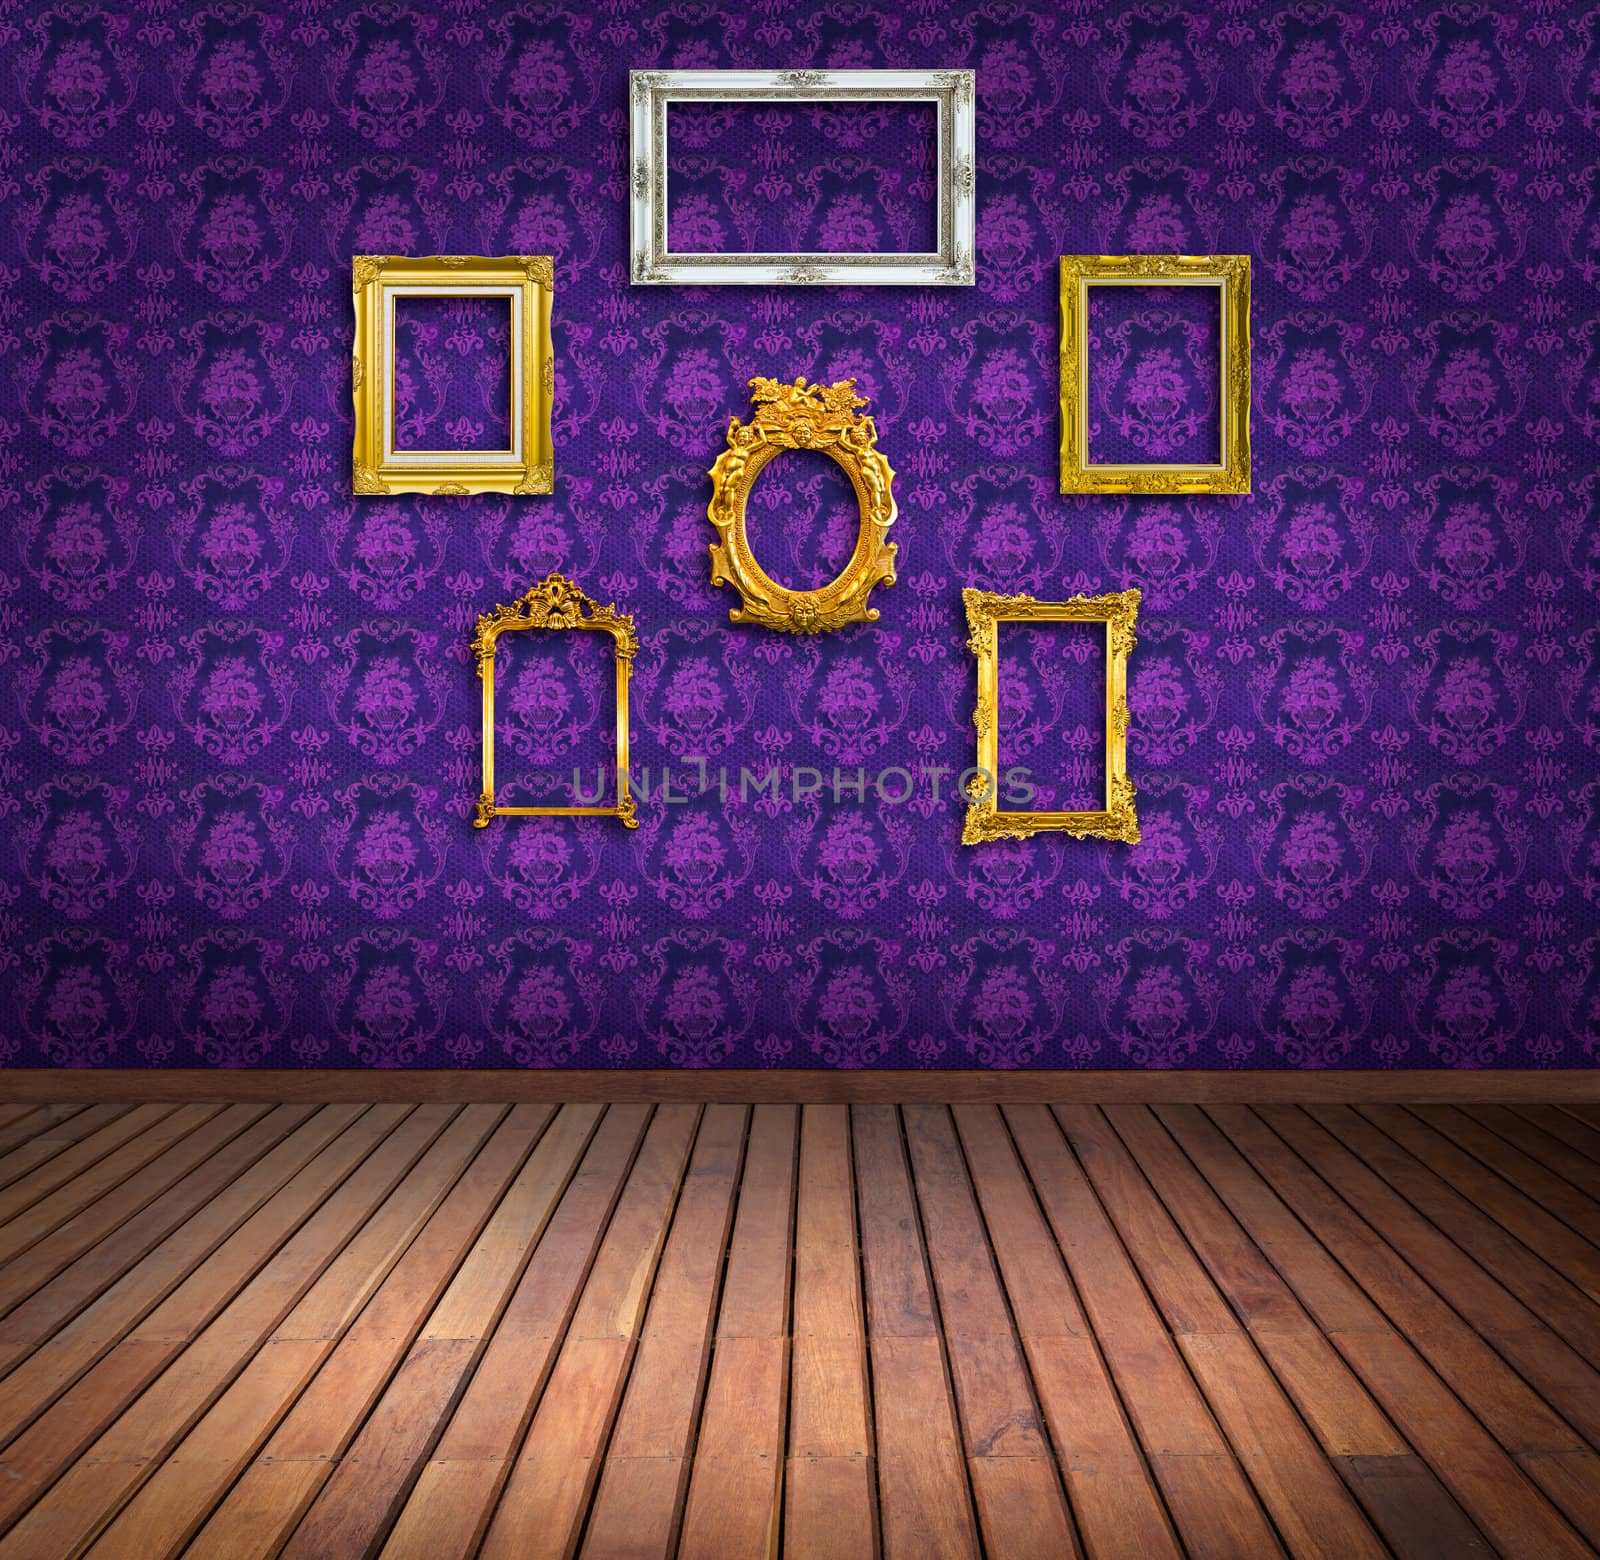 vintage frame in purple wallpaper room by tungphoto